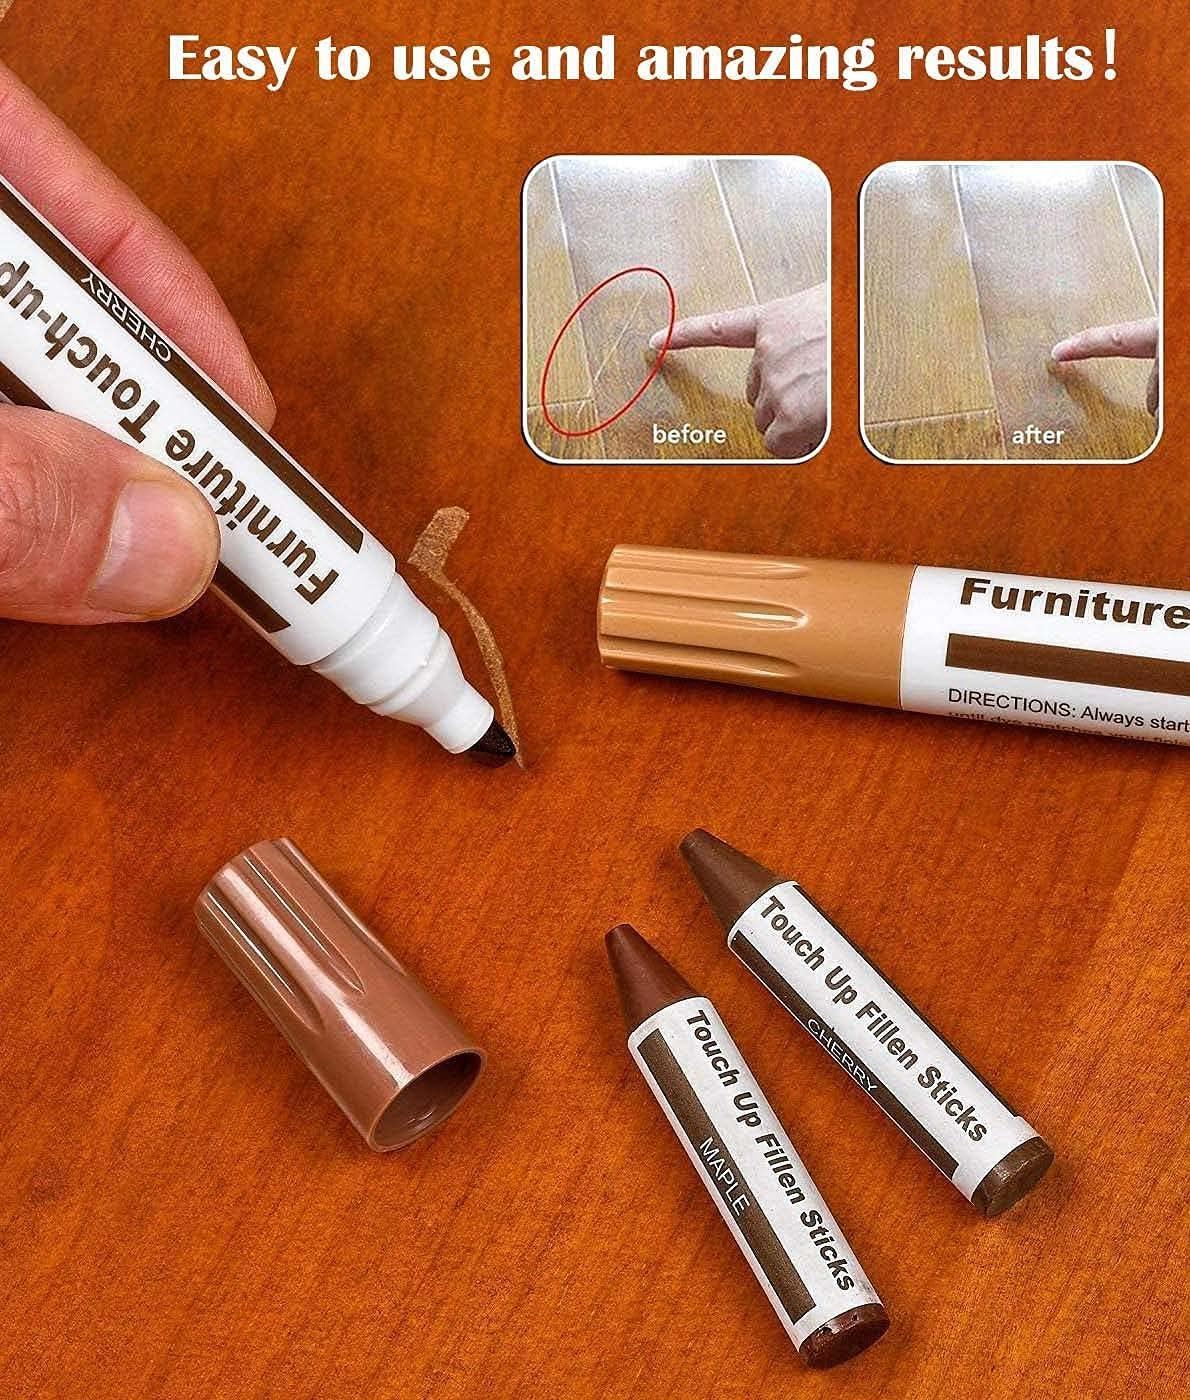 Lifreer Revolutionary Furniture Touch Up Markers, 12 Colors Wood Scratch  Repair Markers Kit - Perfect for Stains, Scratches, Wood Floors, Tables,  and Bedposts - Easy to Use and Long-Lasting Results!